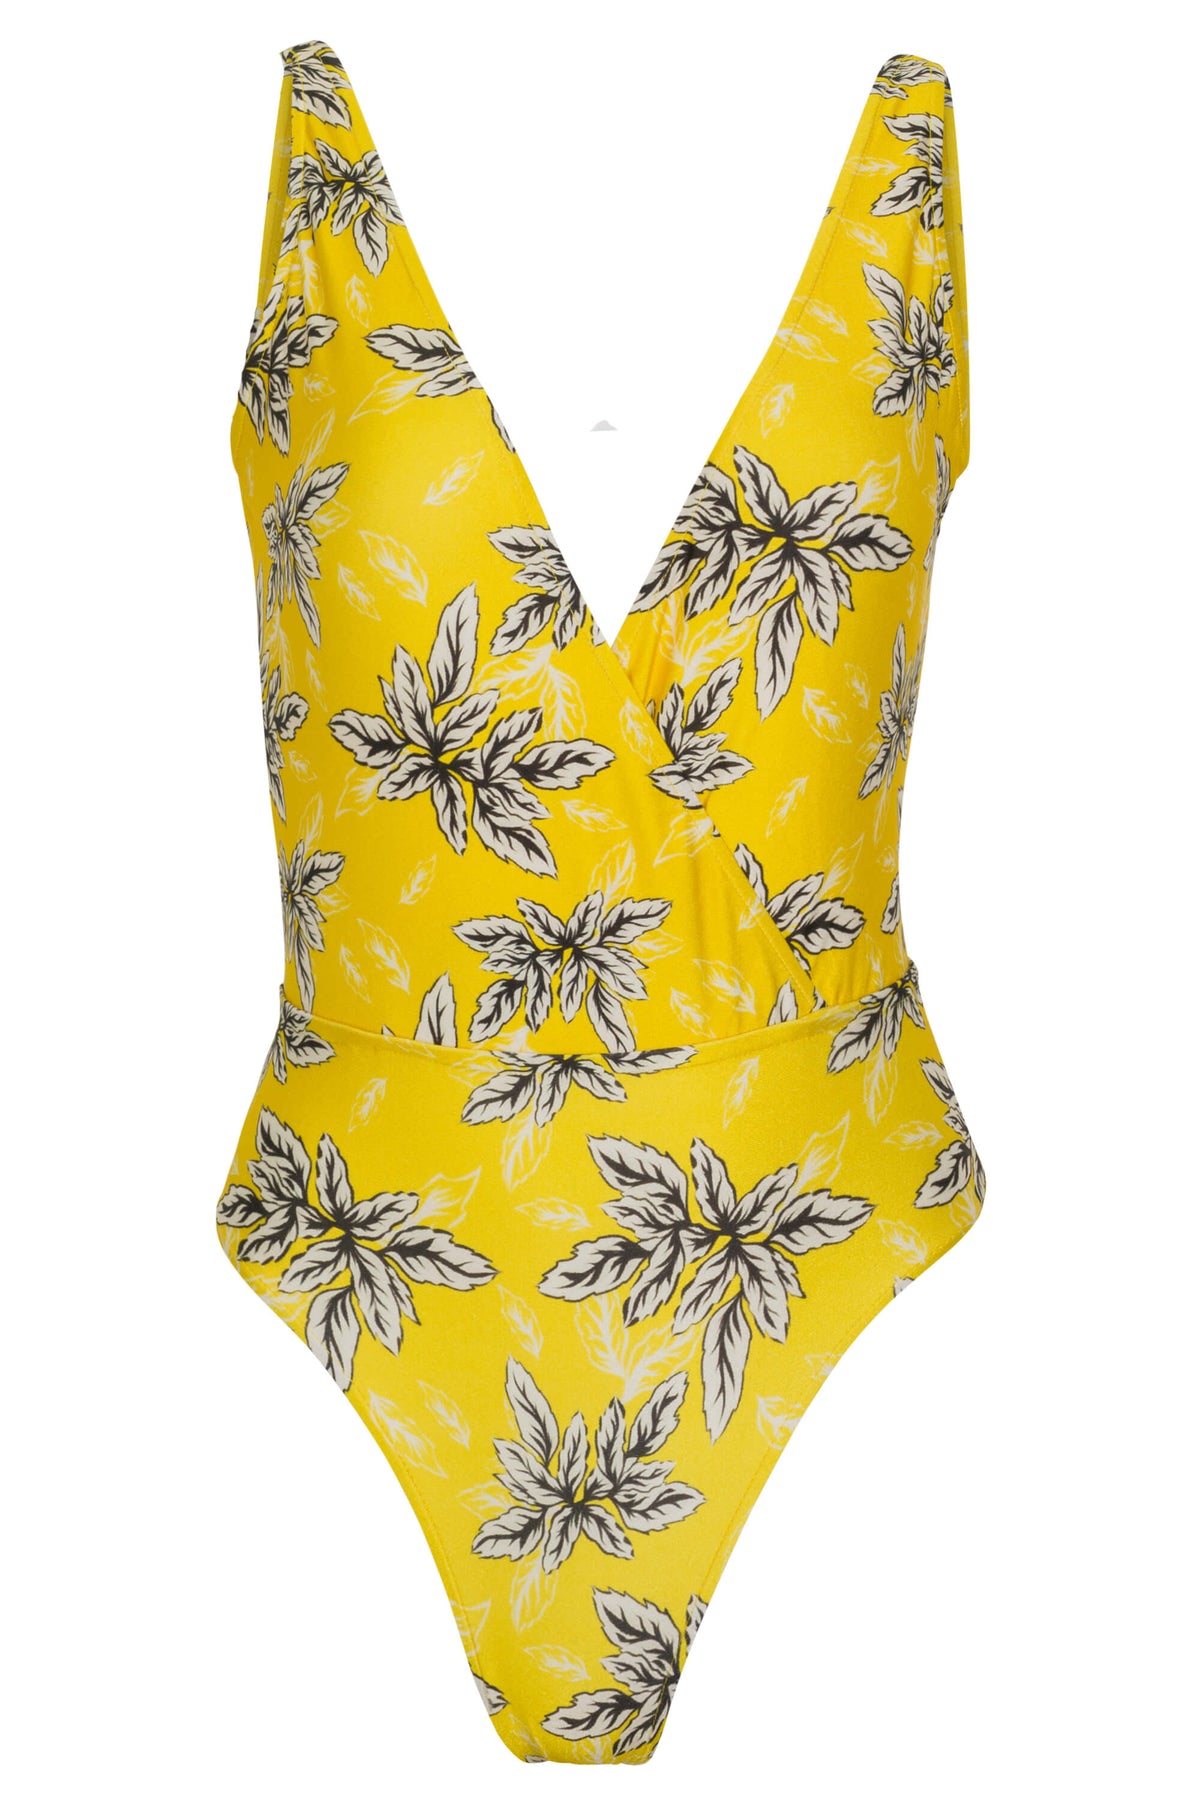 Jacky one piece swimsuit in spring print.